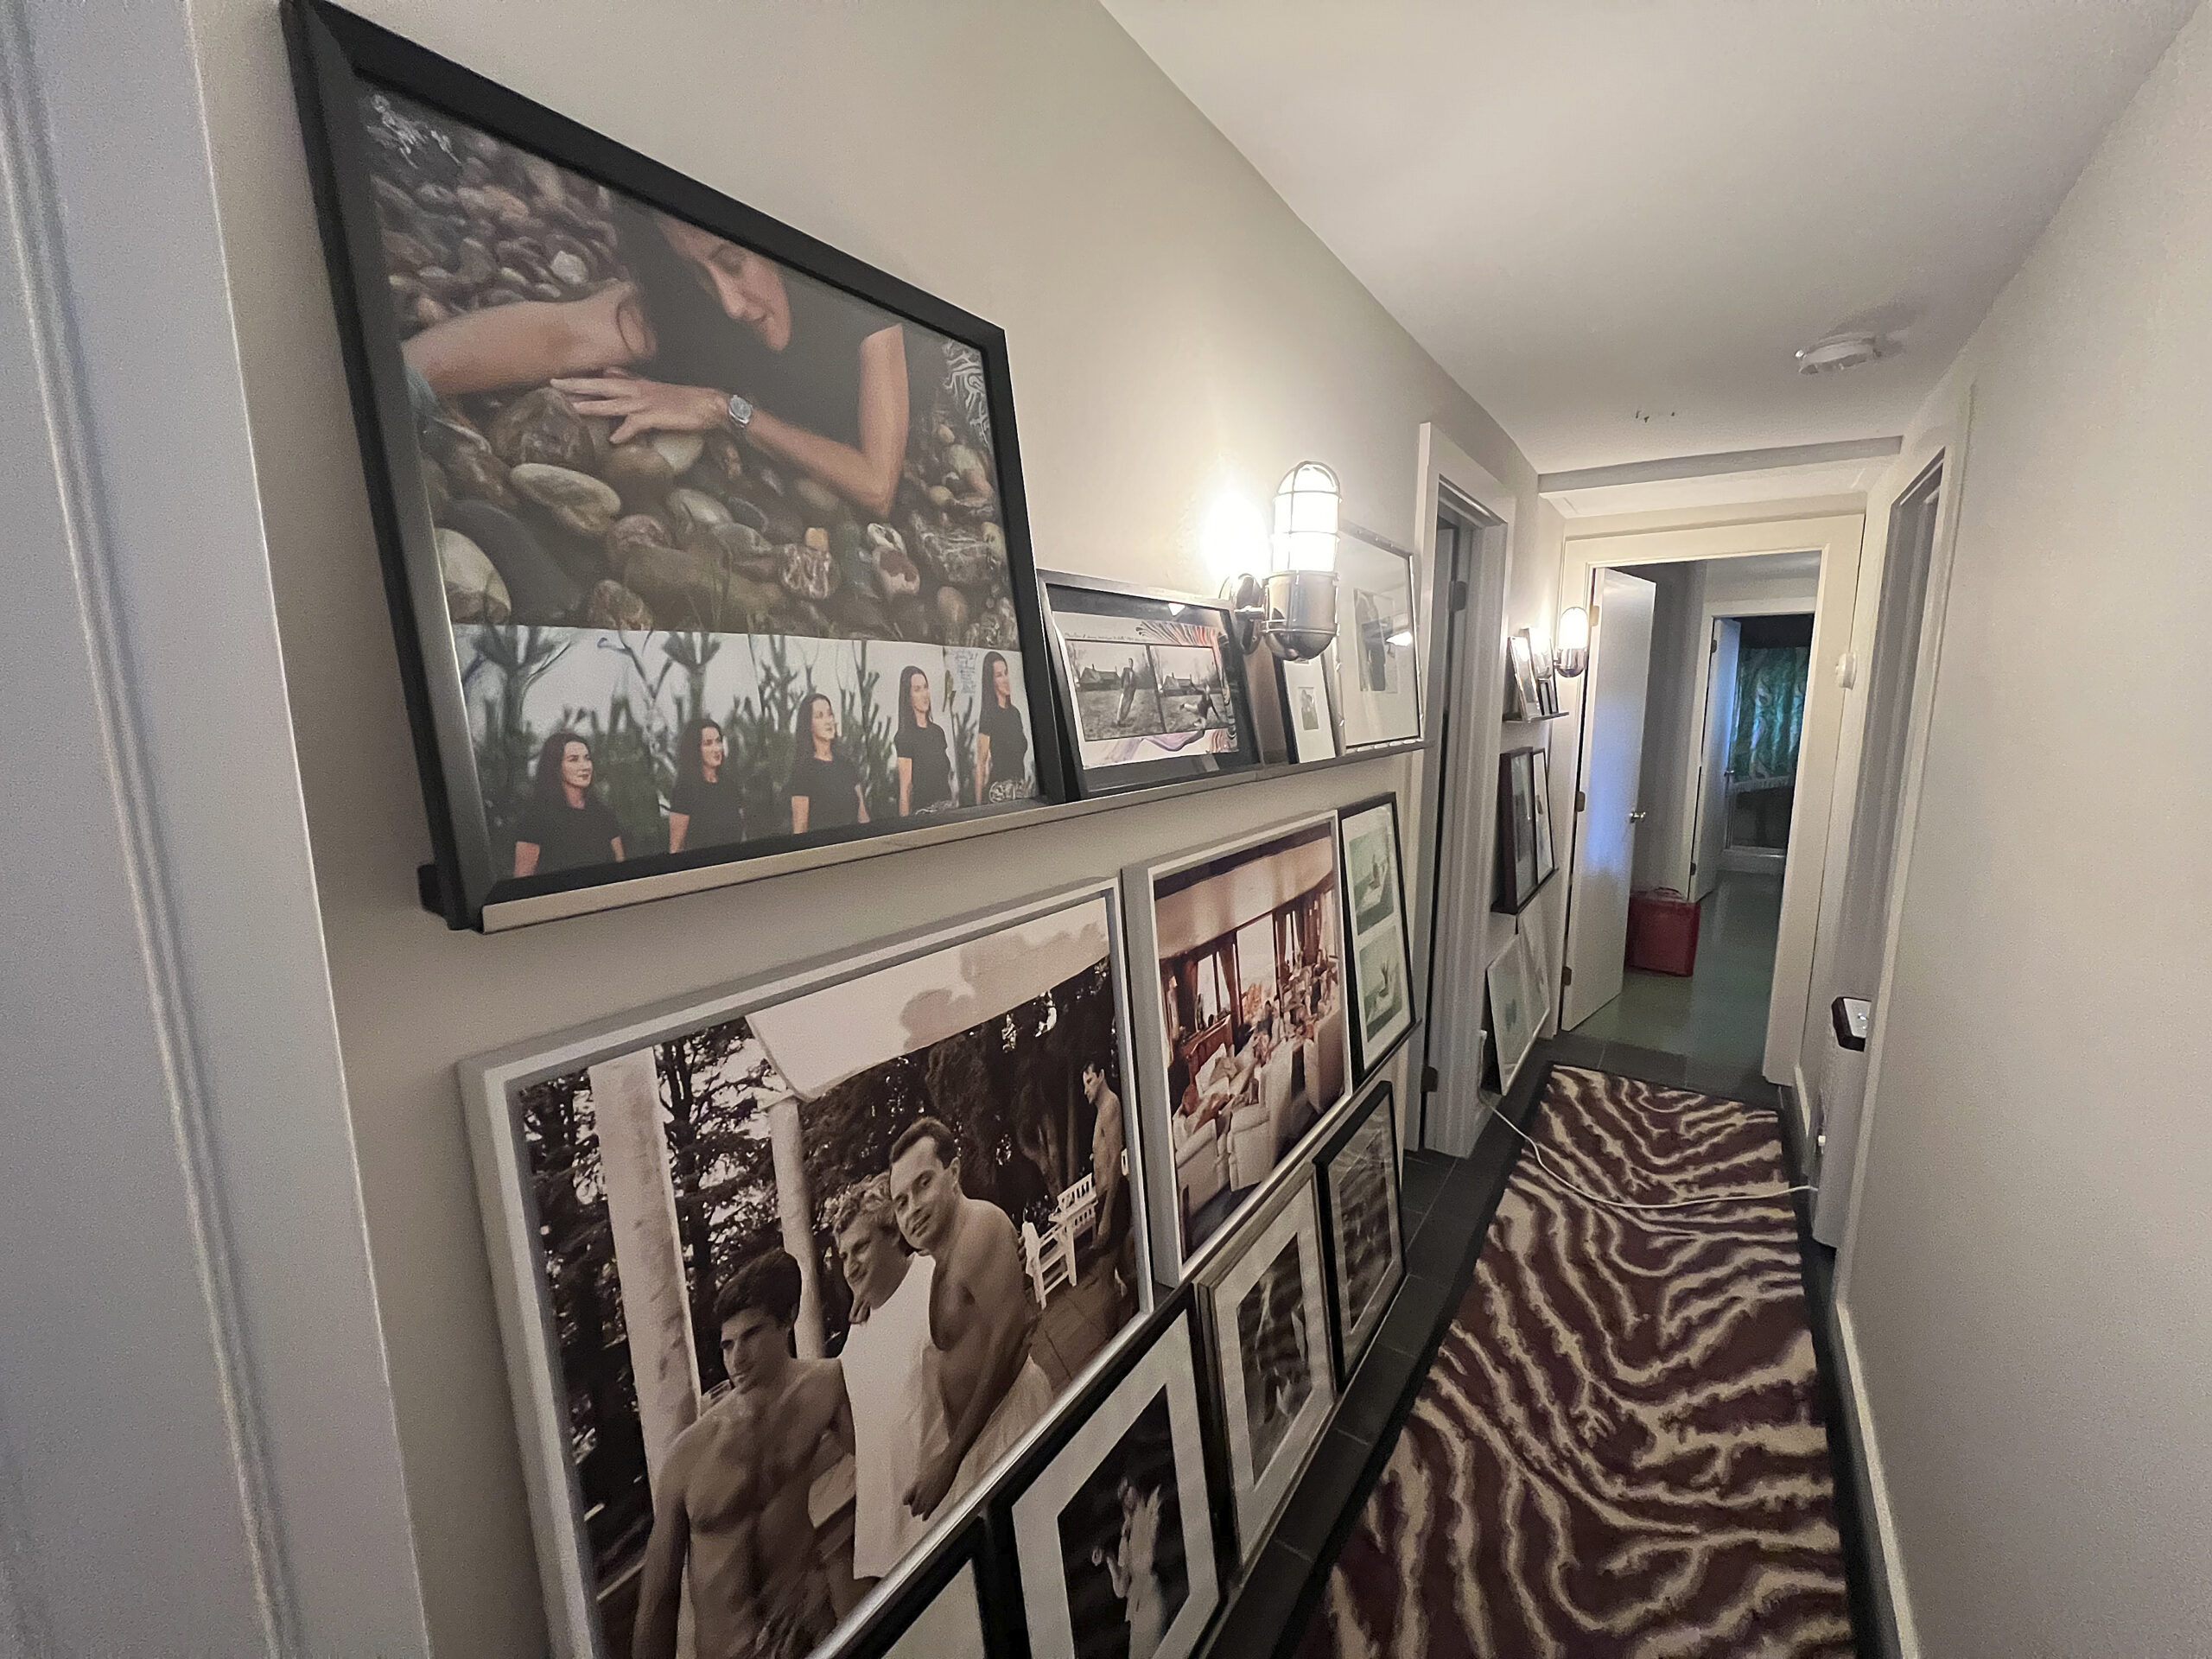 Photographs by Slim Aarons, Kelly Klein and Peter Beard adorn the hallway walls.   DANA SHAW